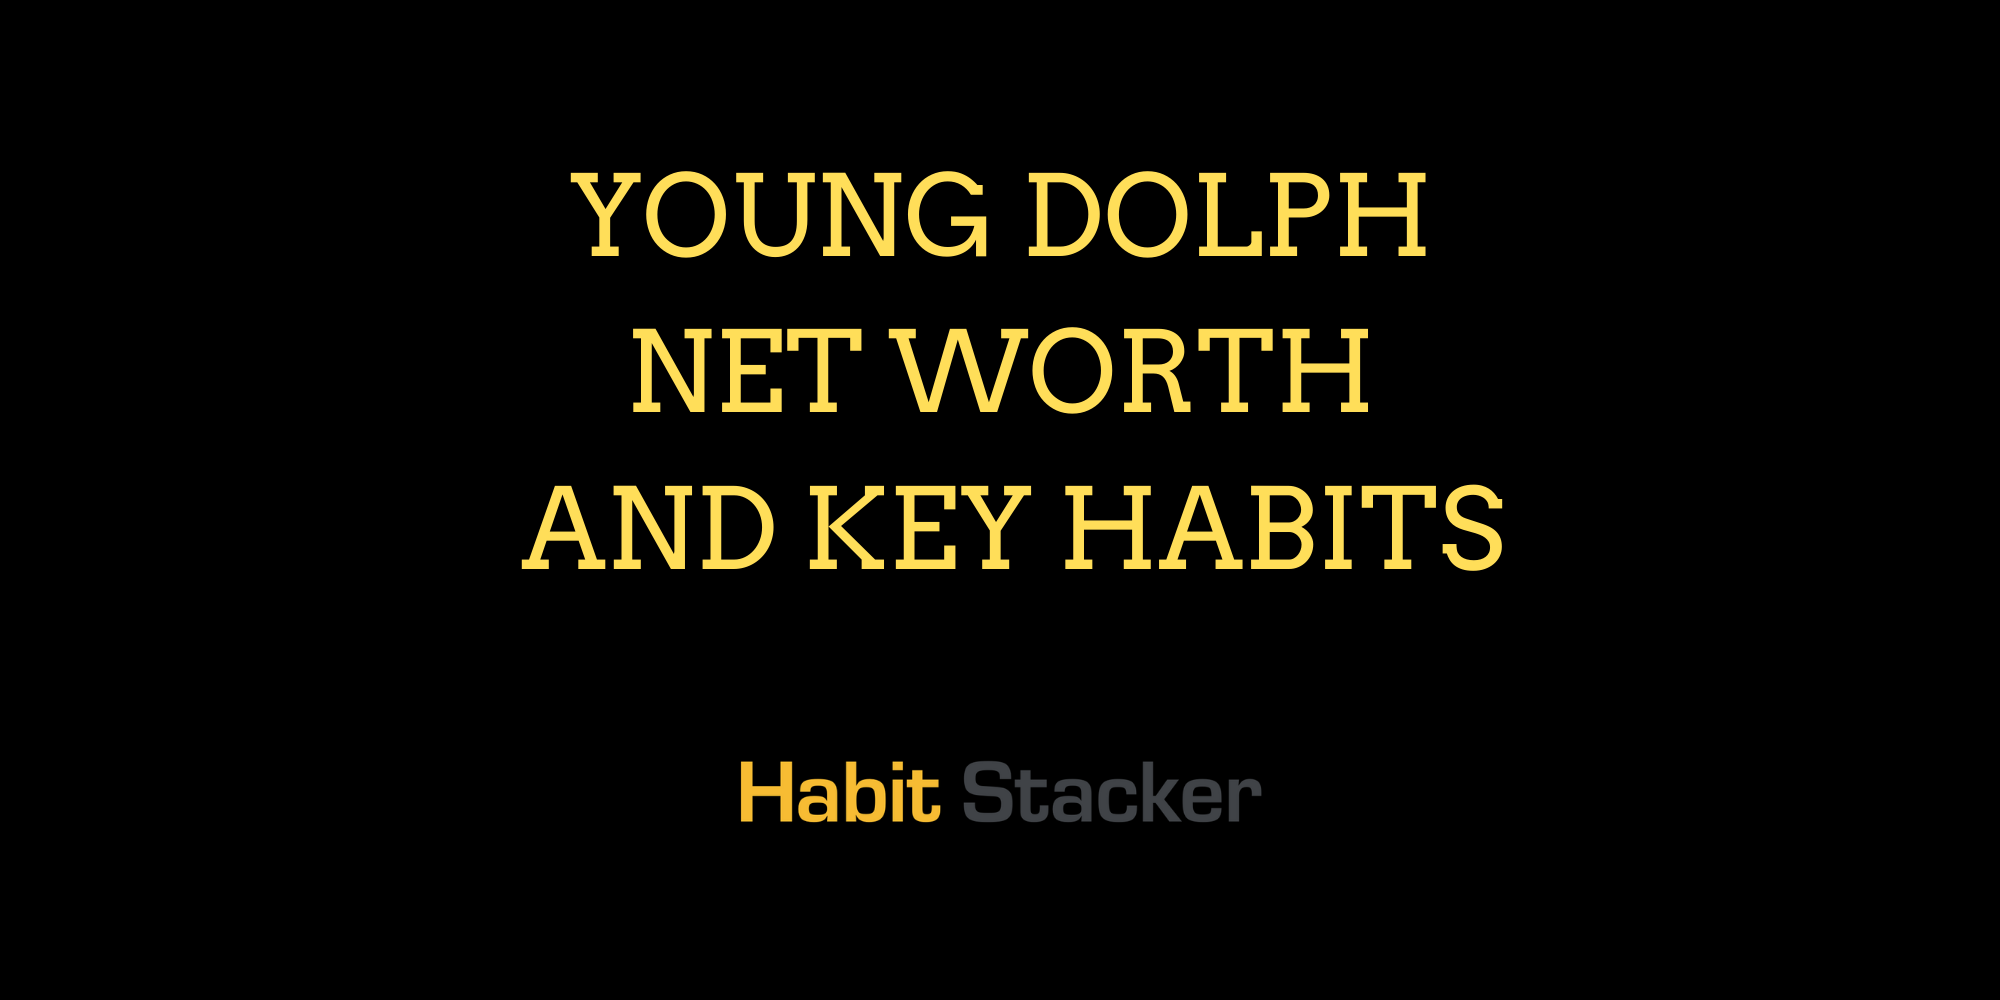 Young Dolph Net Worth and Key Habits